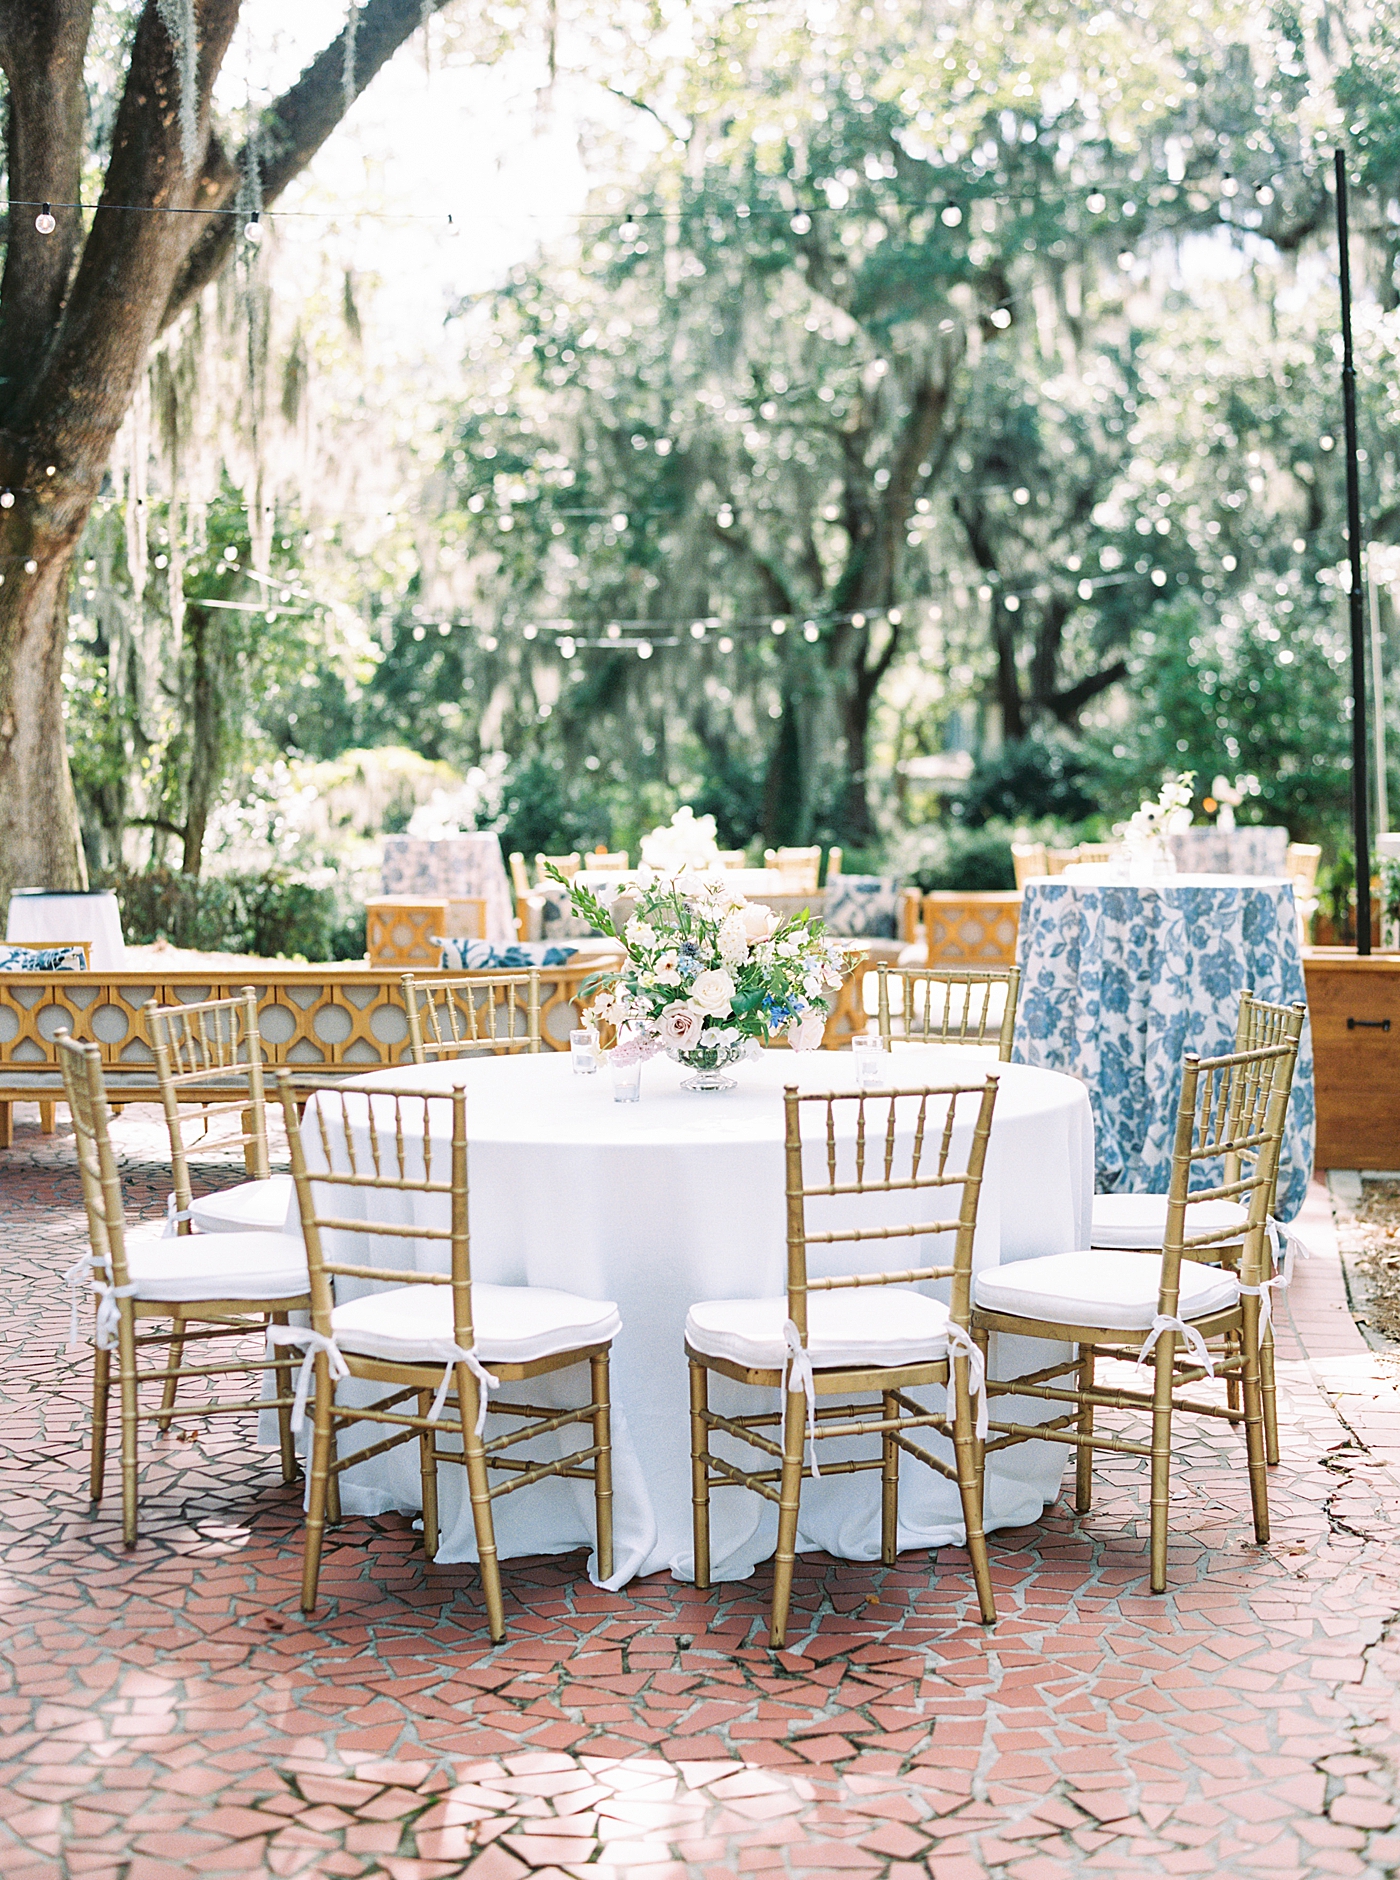 Wedding reception seating | Images by Annie Laura Photography